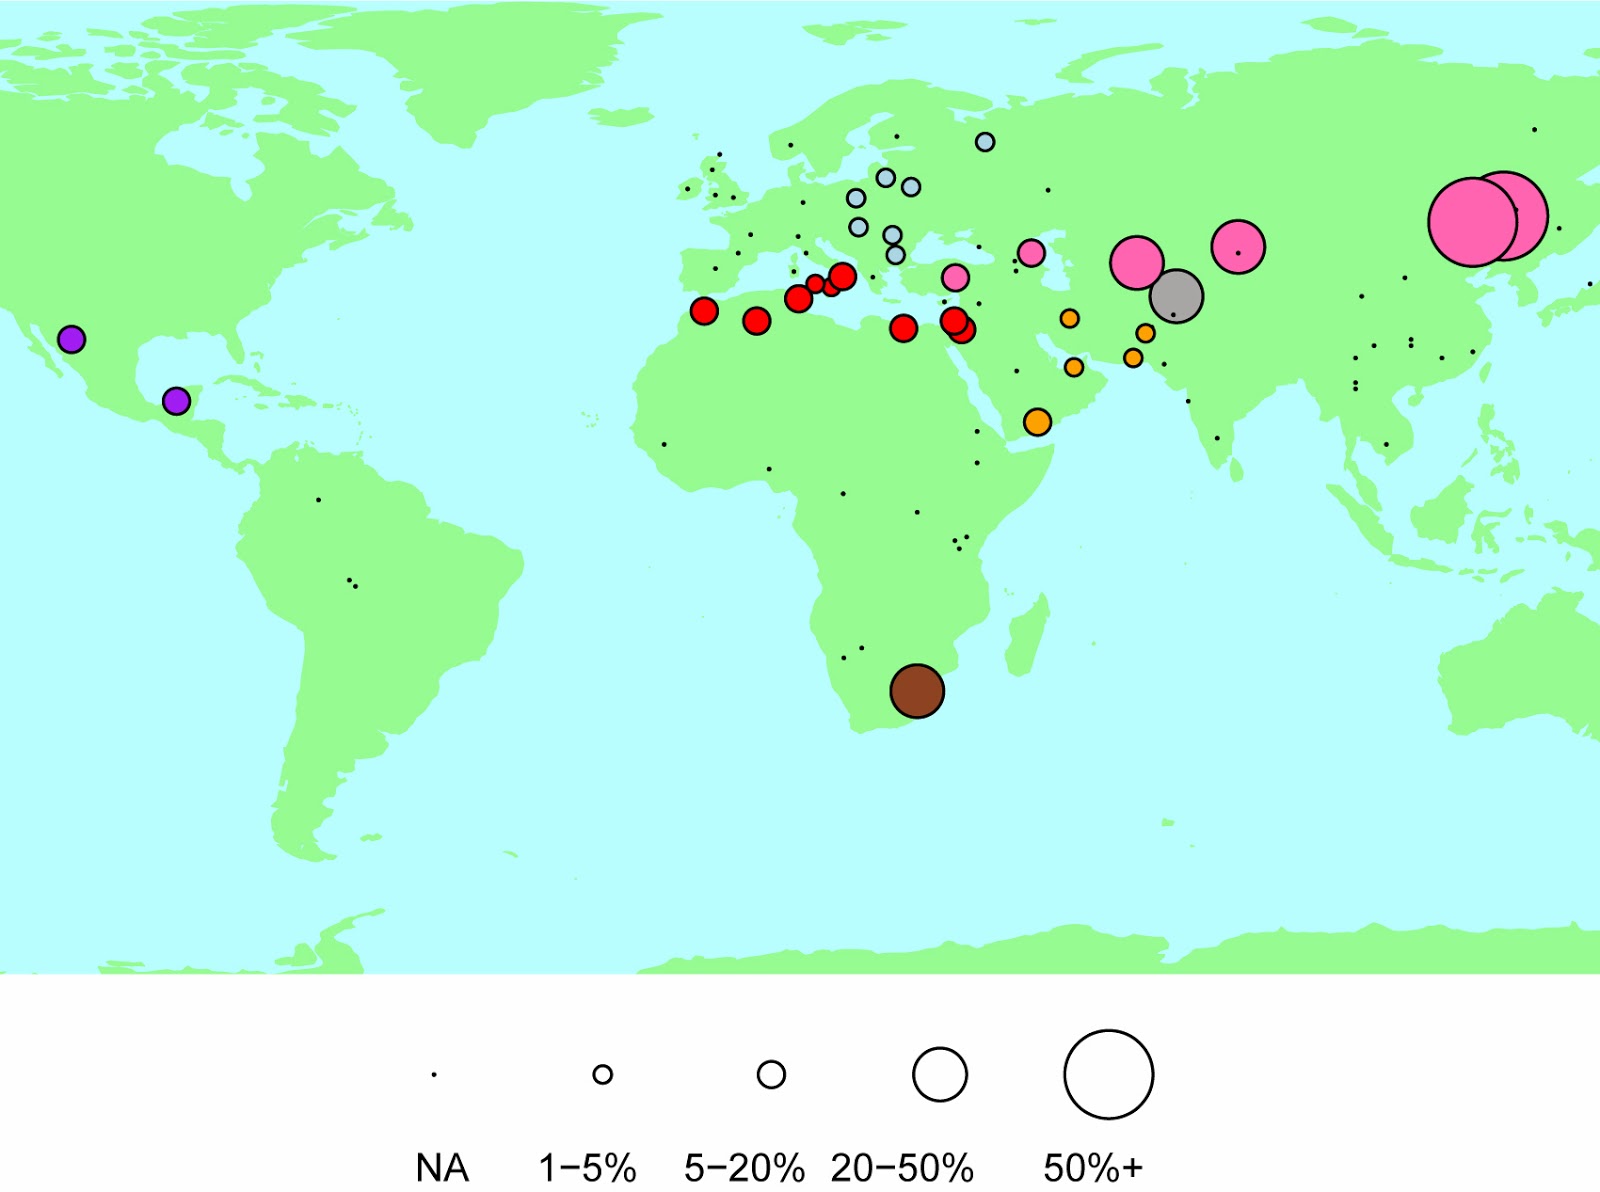 Atlas of human genetic history reveals likely genetic impacts of historical events